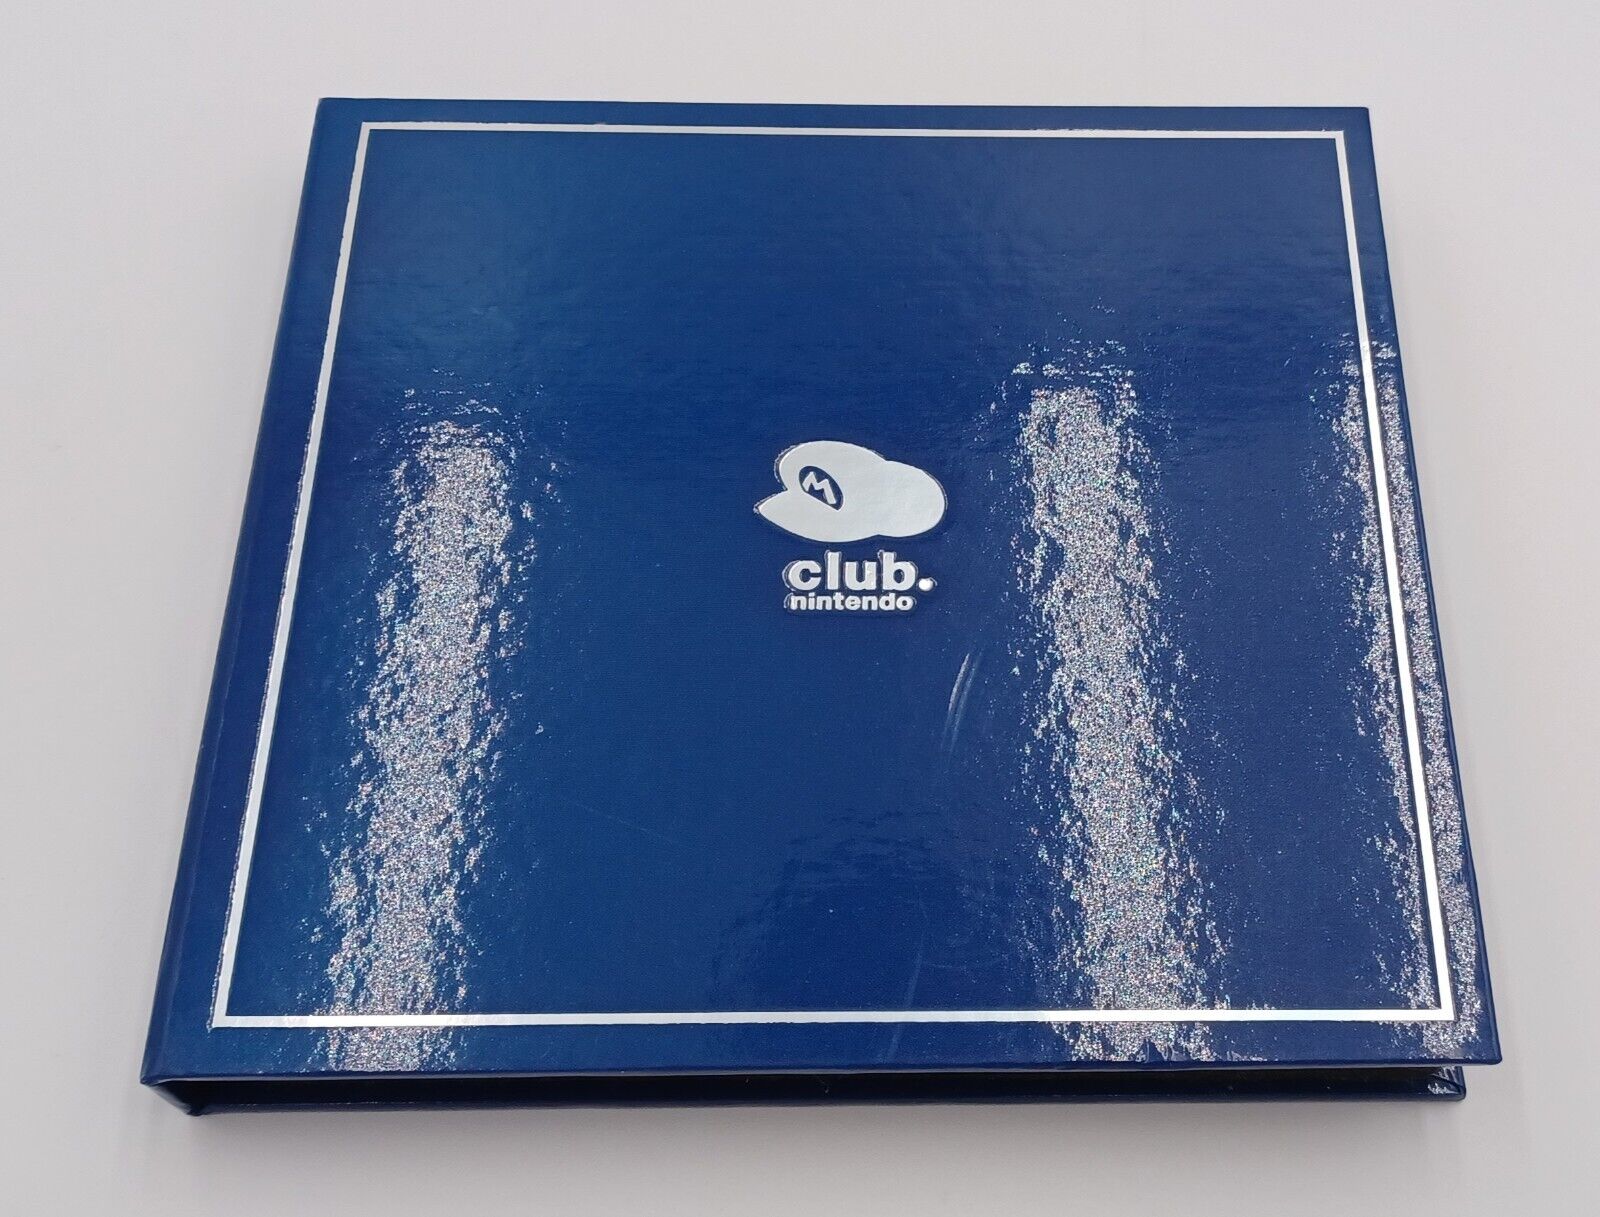 Club Nintendo Limited Edition Blue Box For Set of 7 Stylus and 9 Games Storage